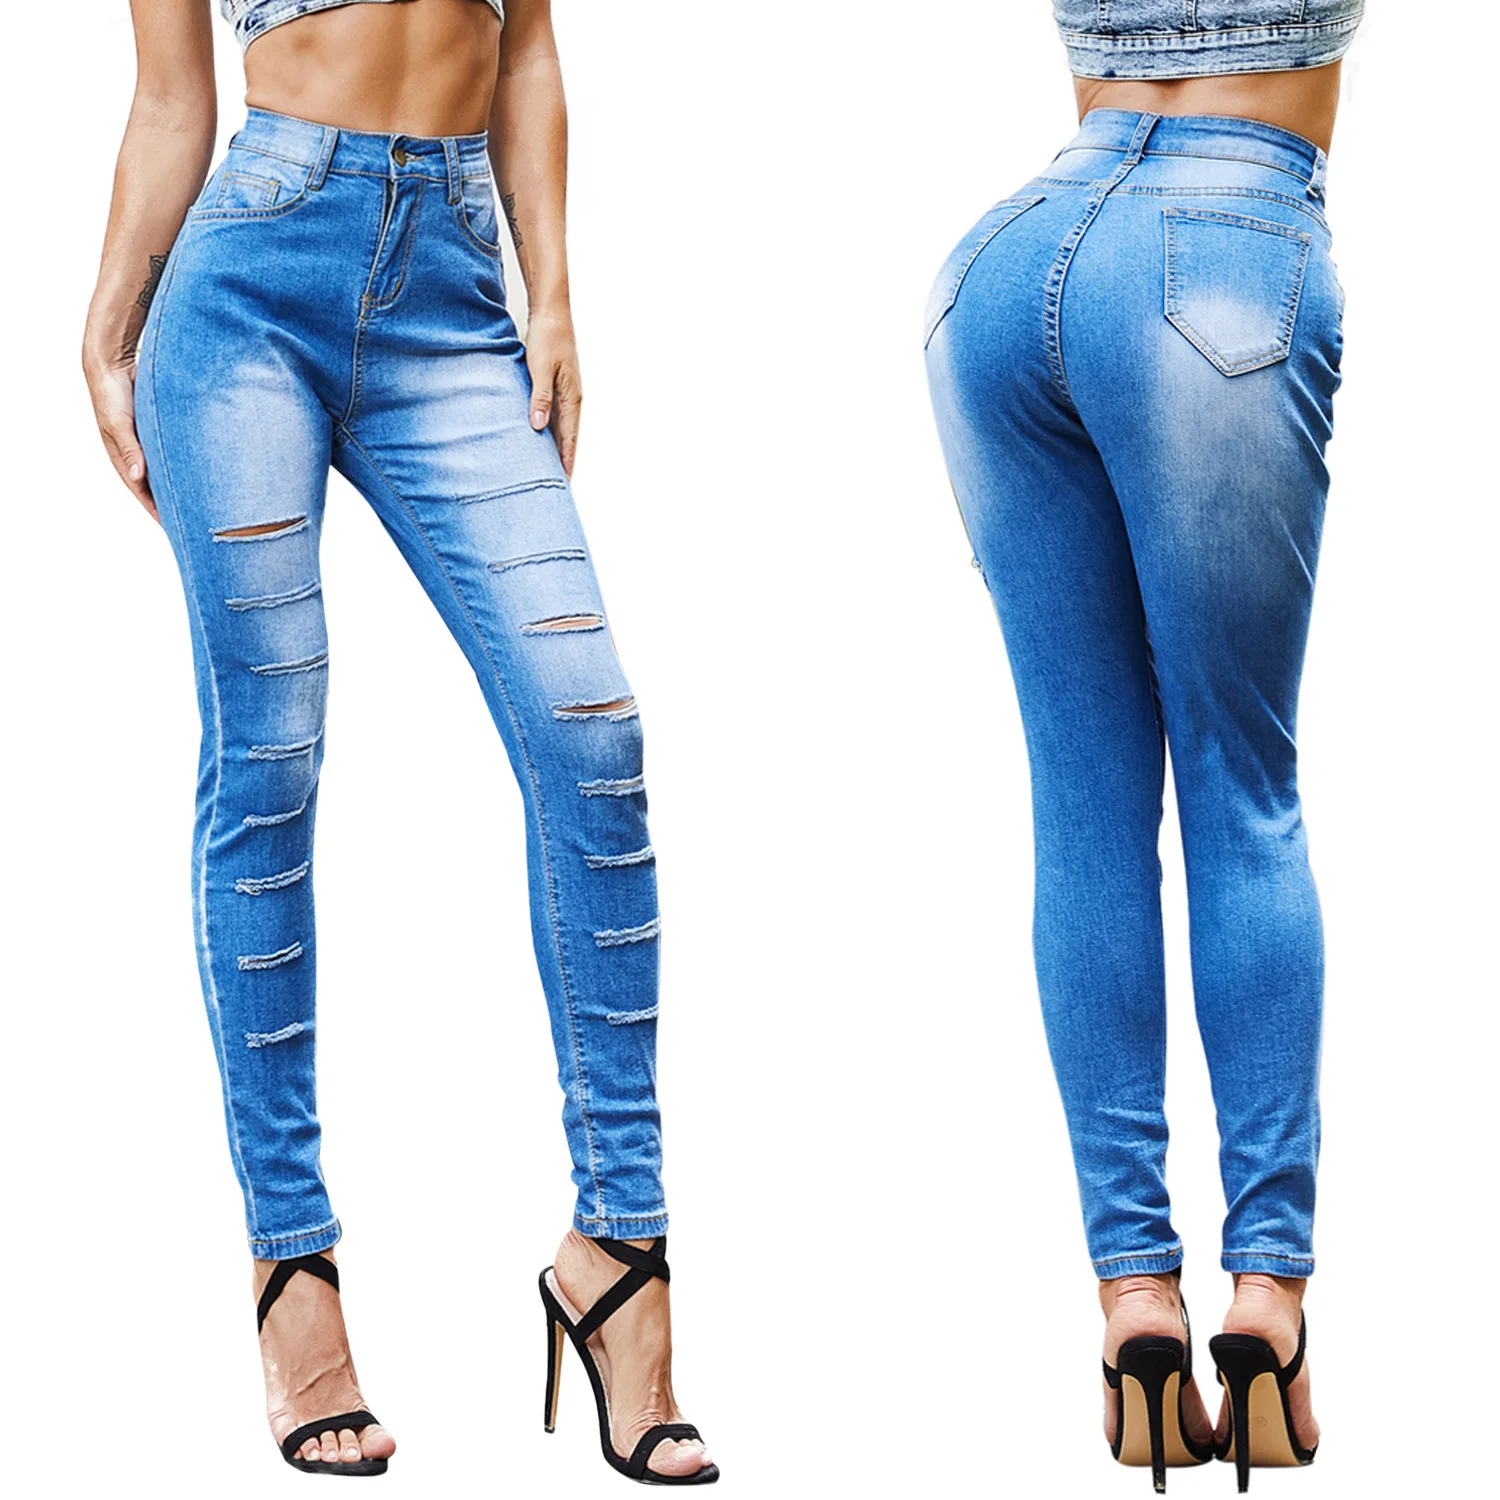 

Hot Selling Jeans Pencil Pants High Waist Solid Color Sexy Slim-Fit Speaker Pants Women Jeans Women skinny jeans for women